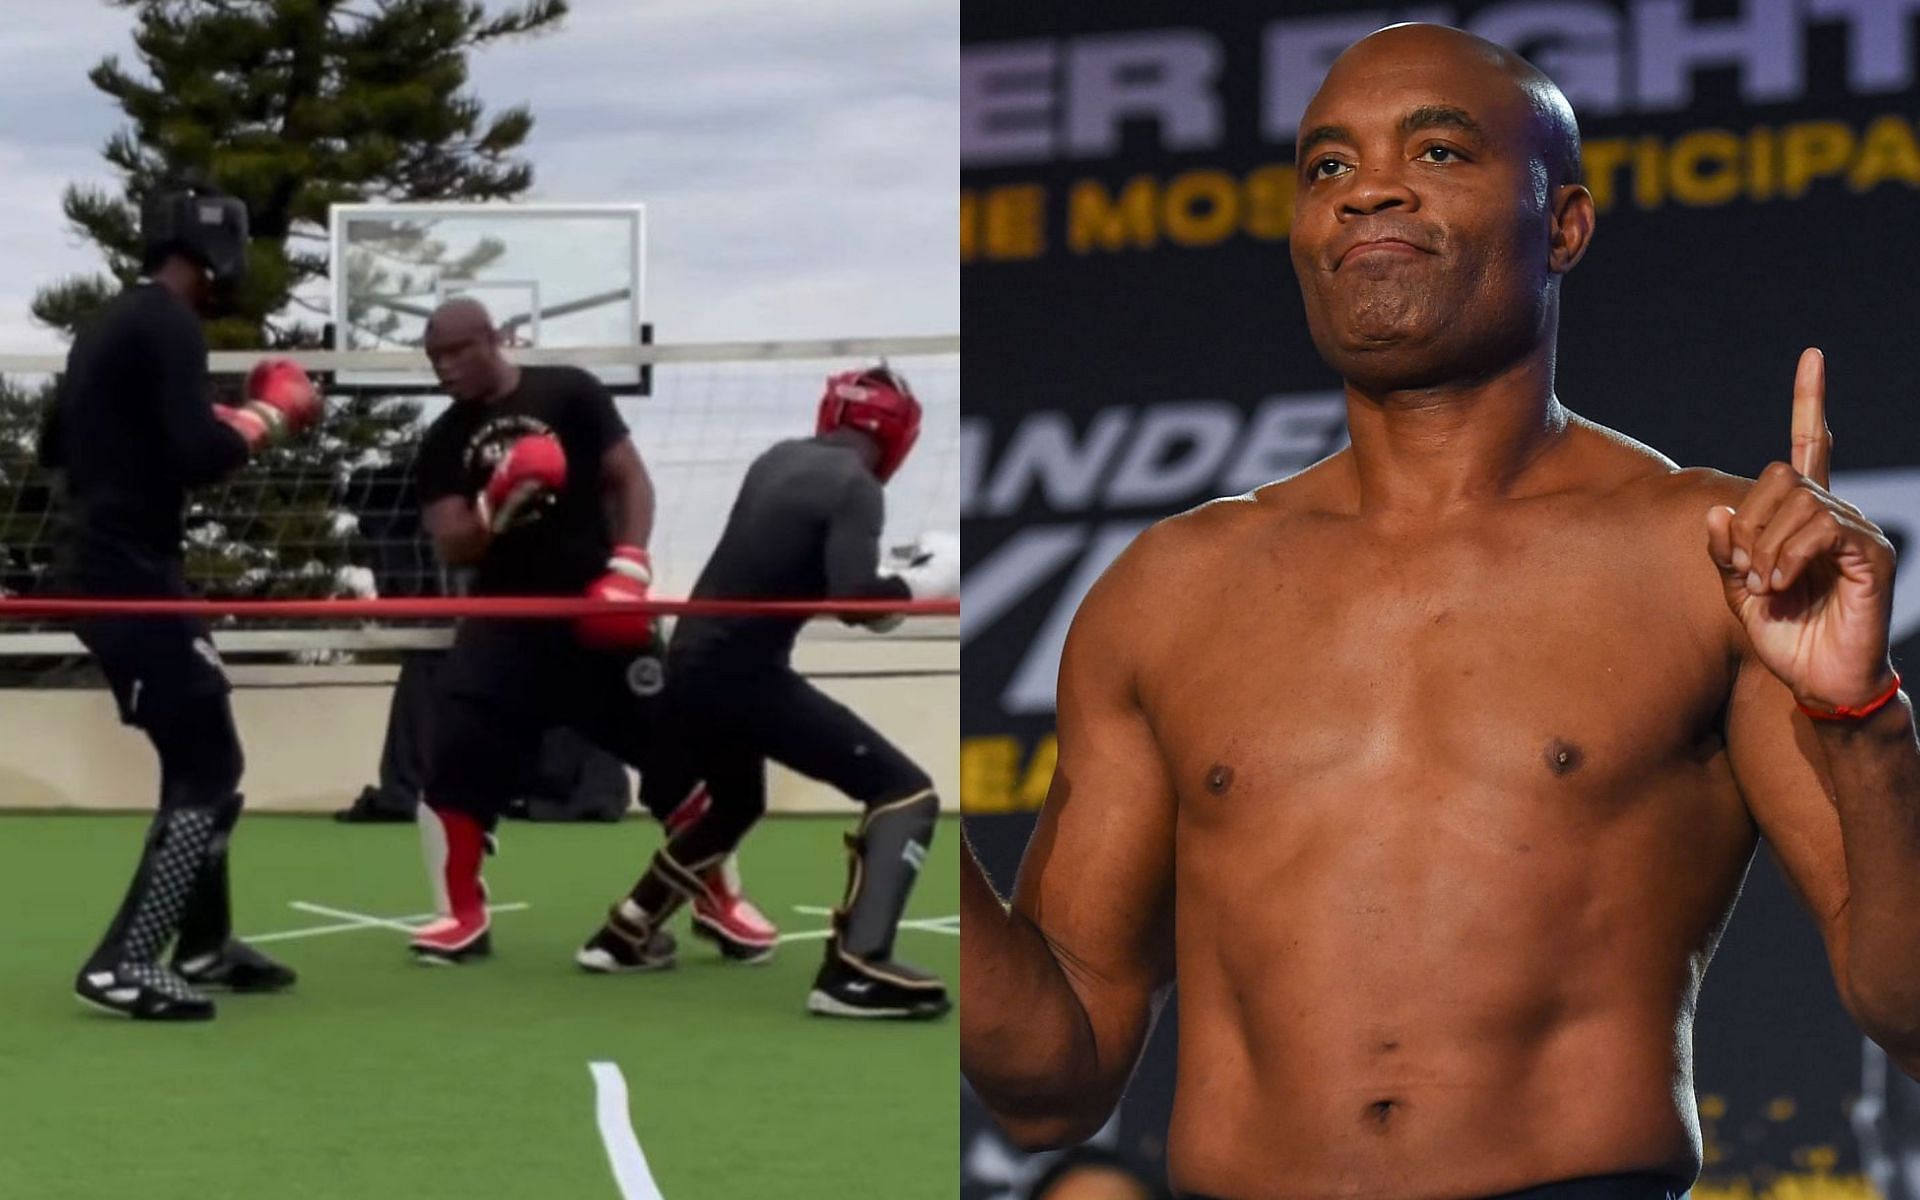 Anderson Silva dominates 2-on-1 sparring session